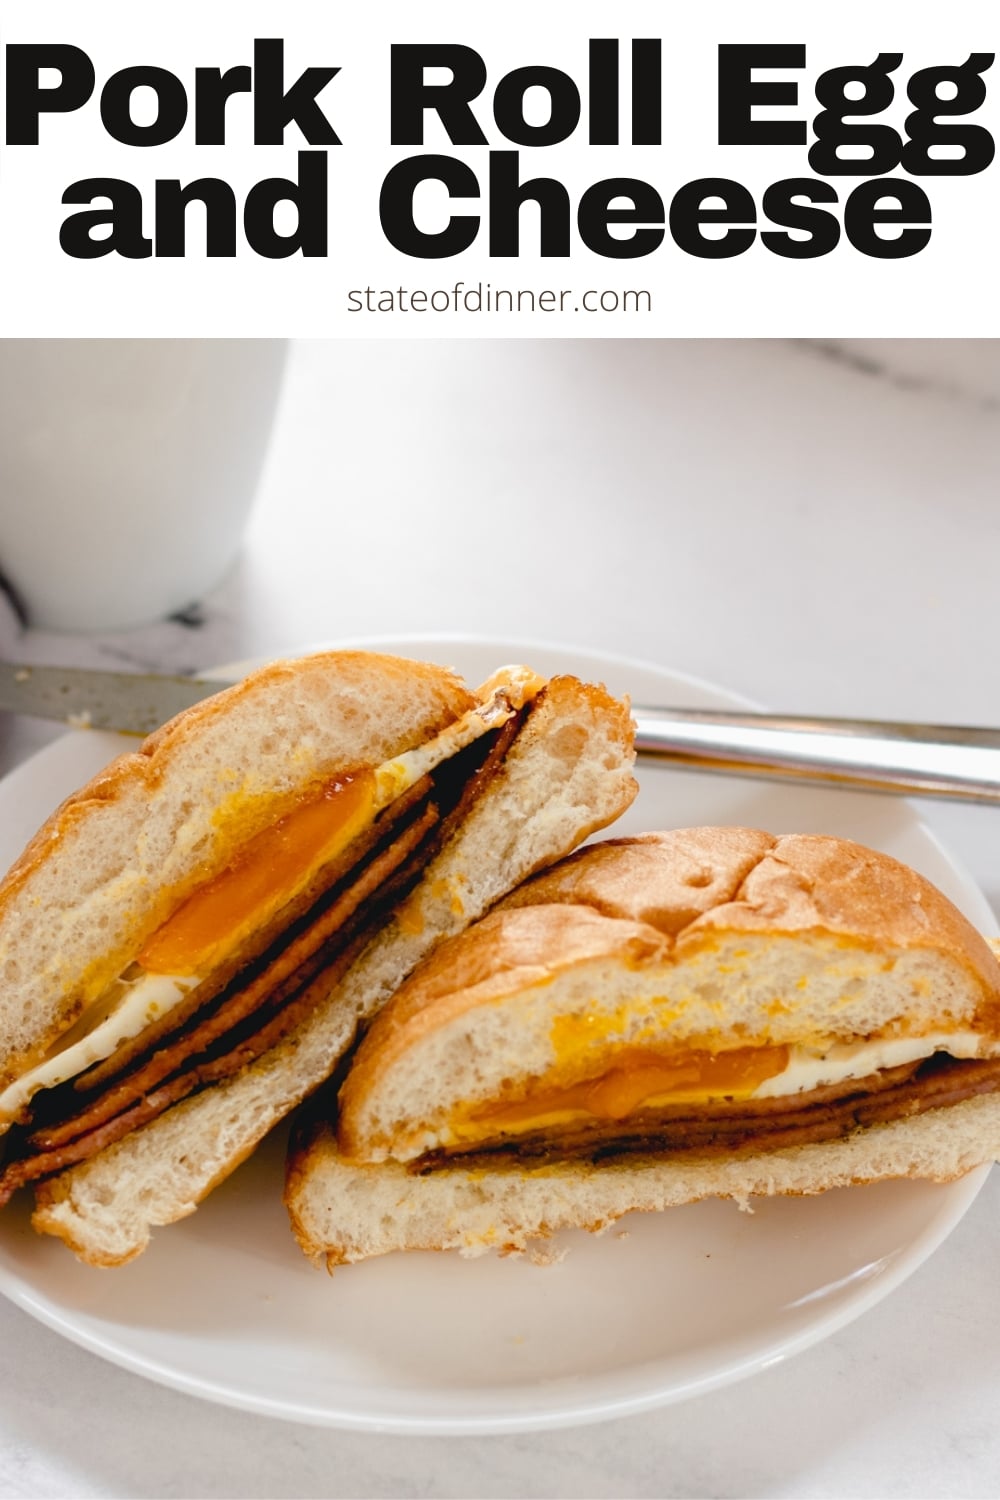 Pork Roll Egg and Cheese Sandwich Recipe – State of Dinner